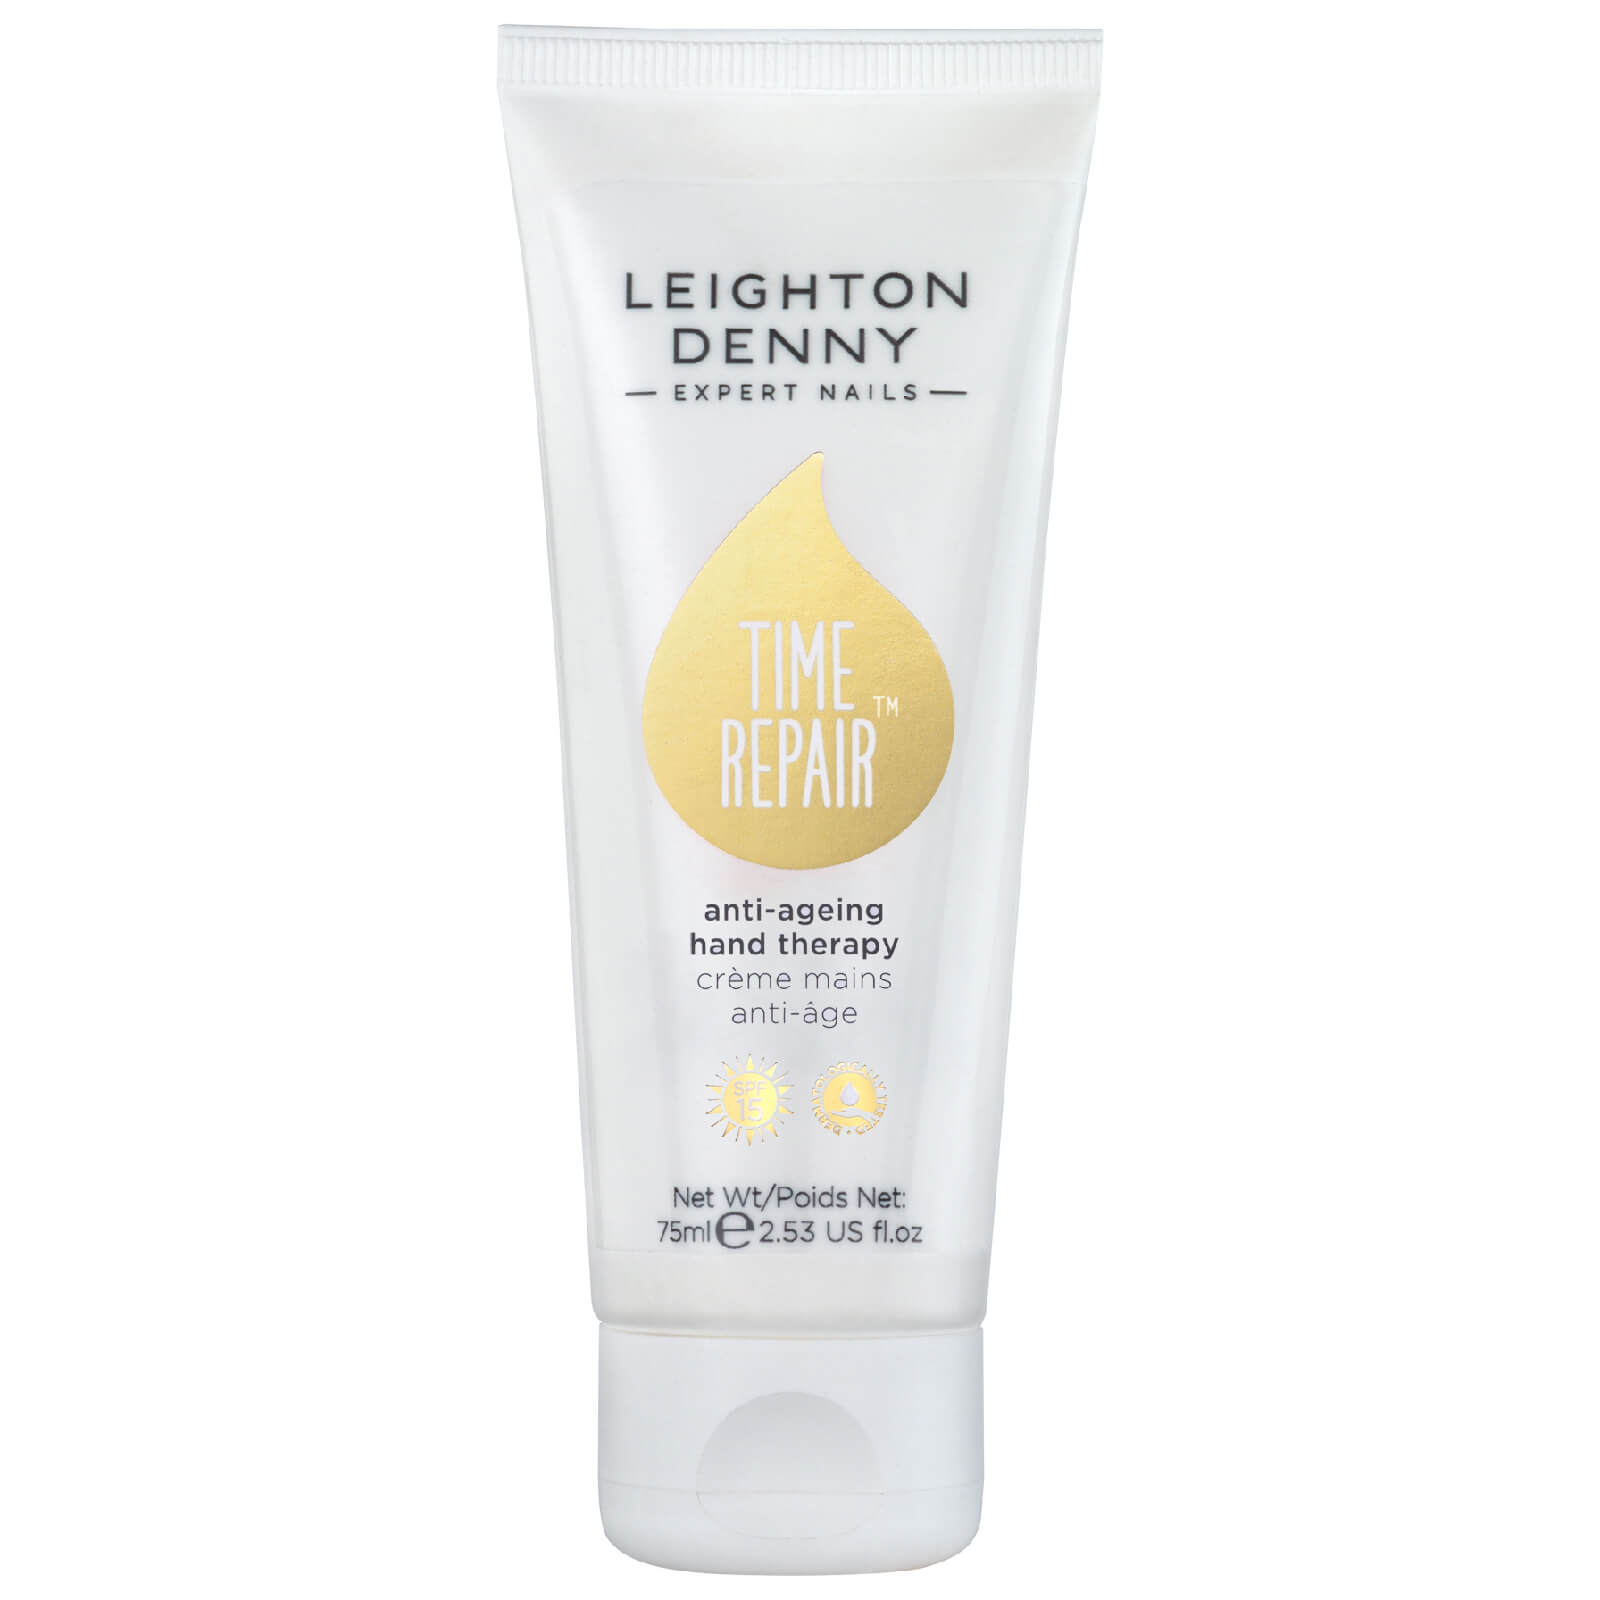 Image of Leighton Denny Time Repair Anti-Ageing Hand Therapy 75ml